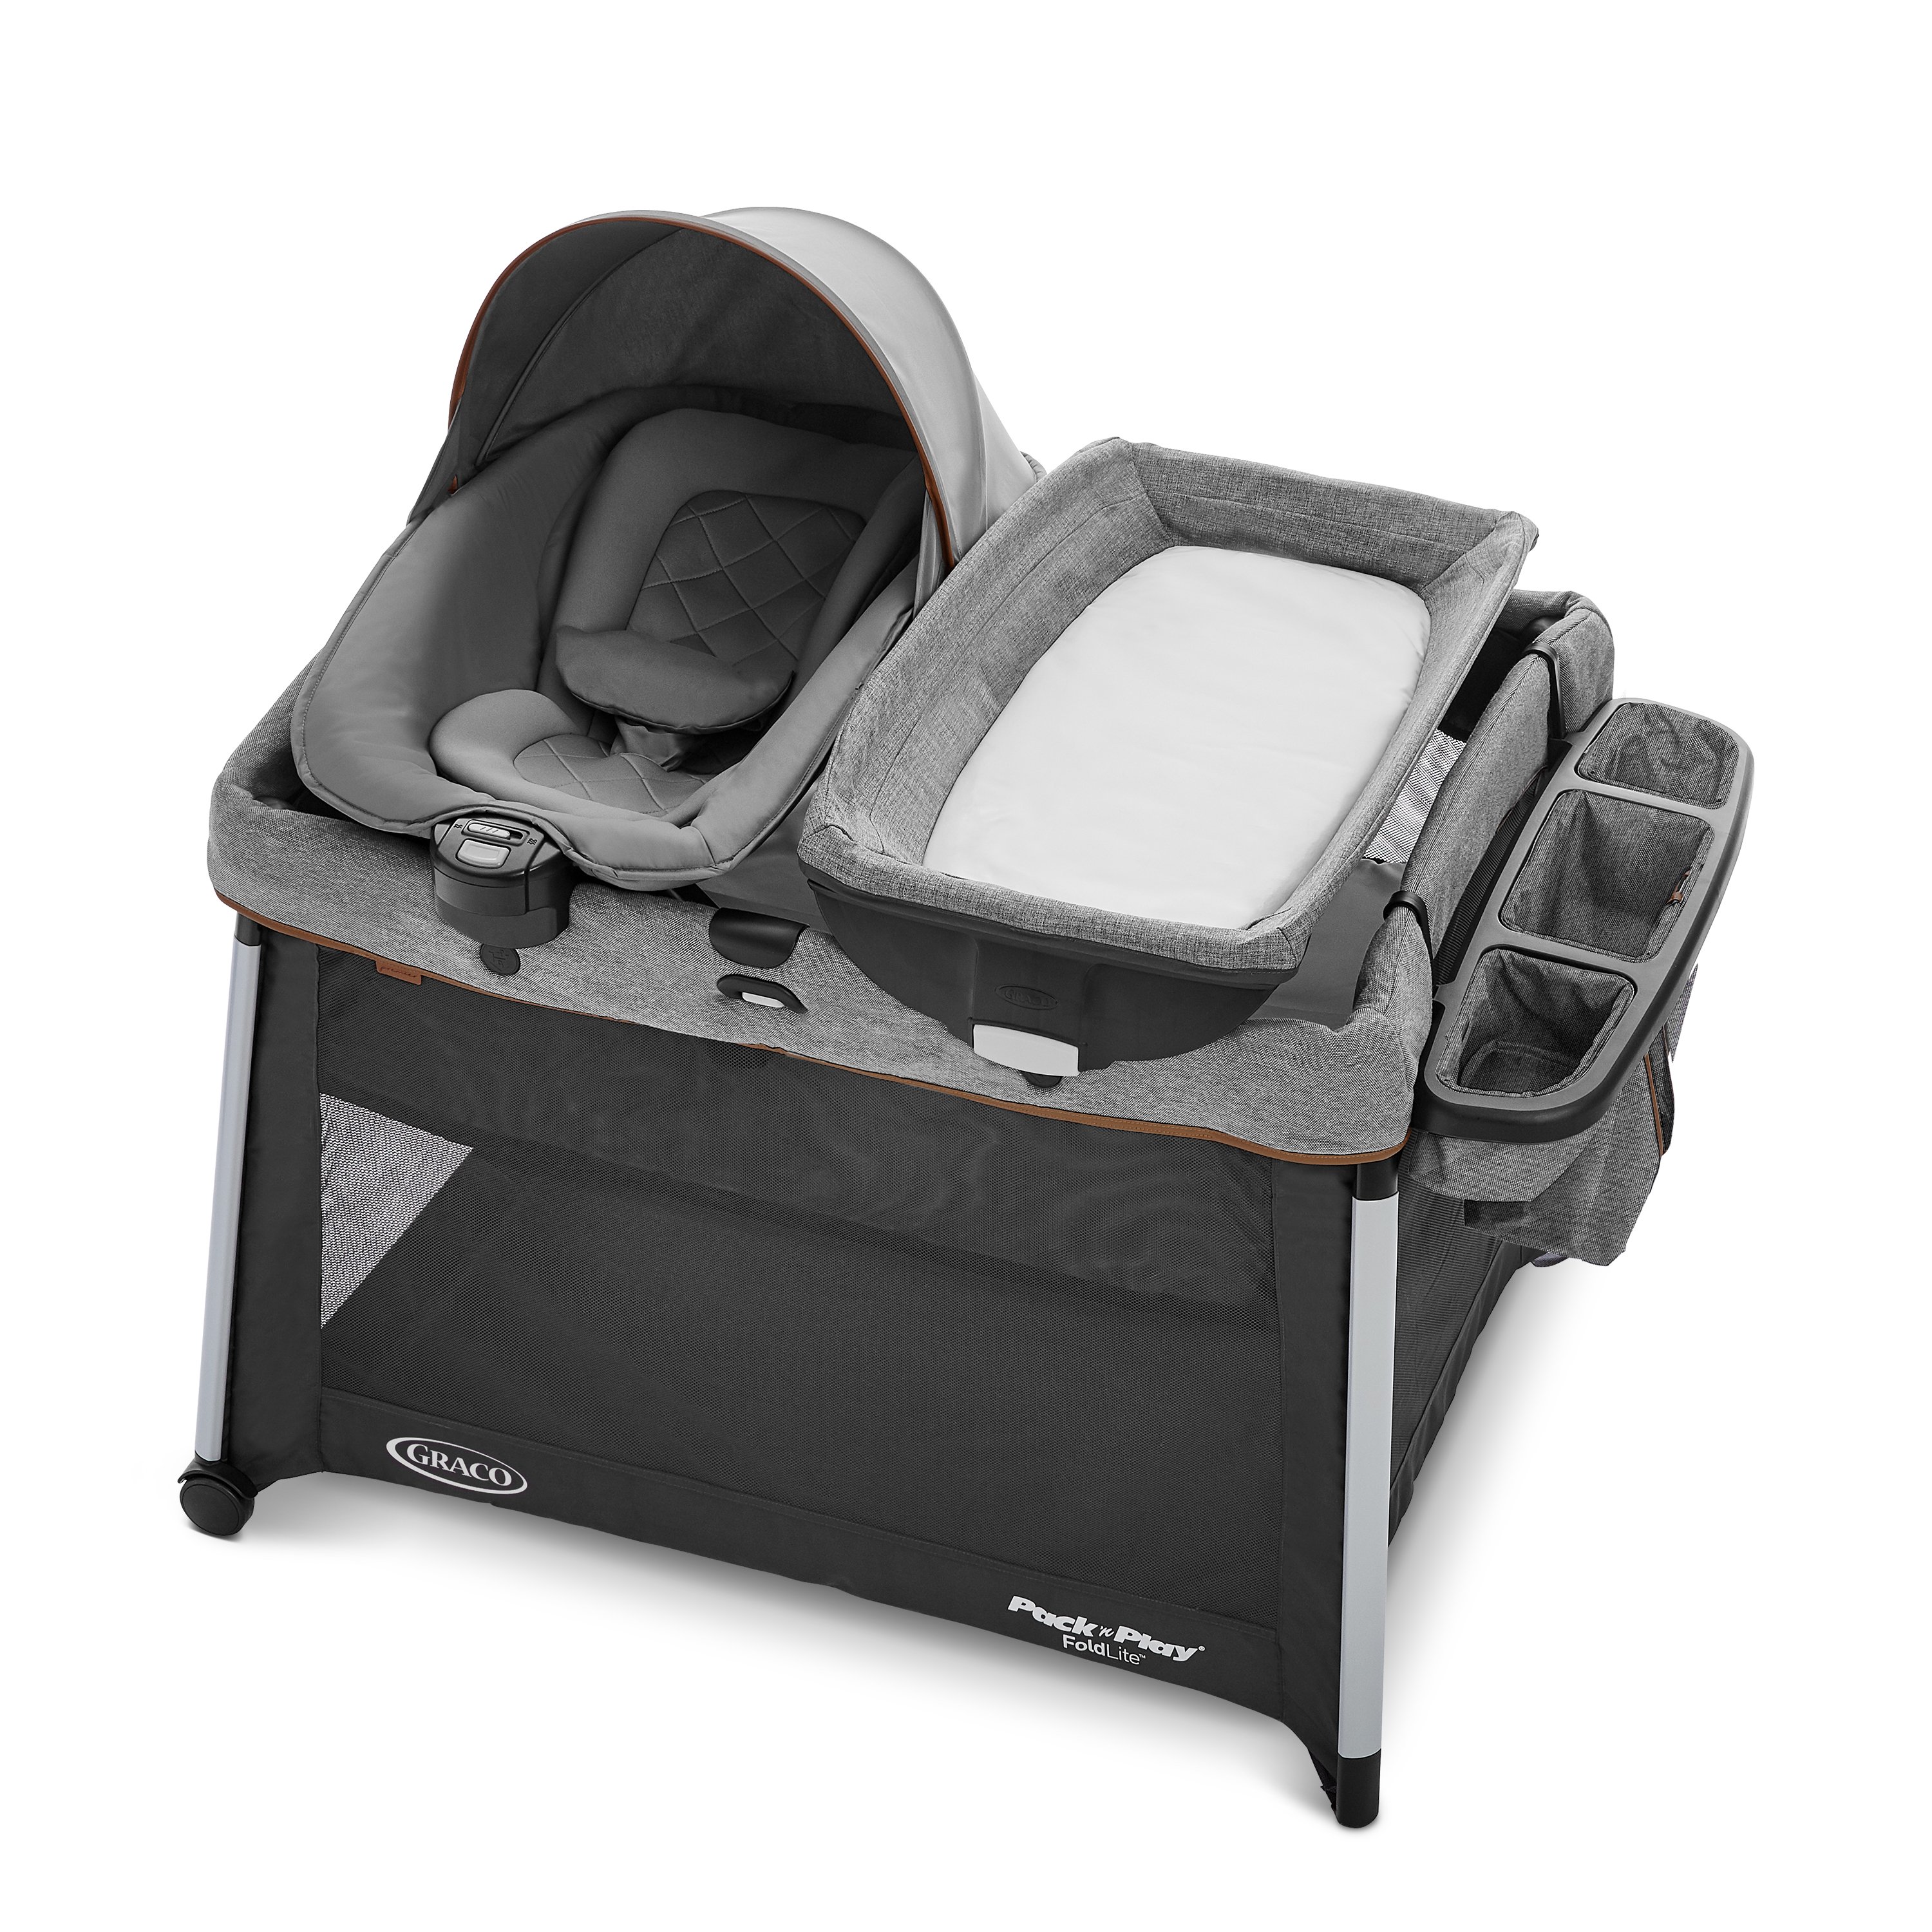 Graco Graco® Pack Play® Playard, Savoy™ Collection Graco Baby